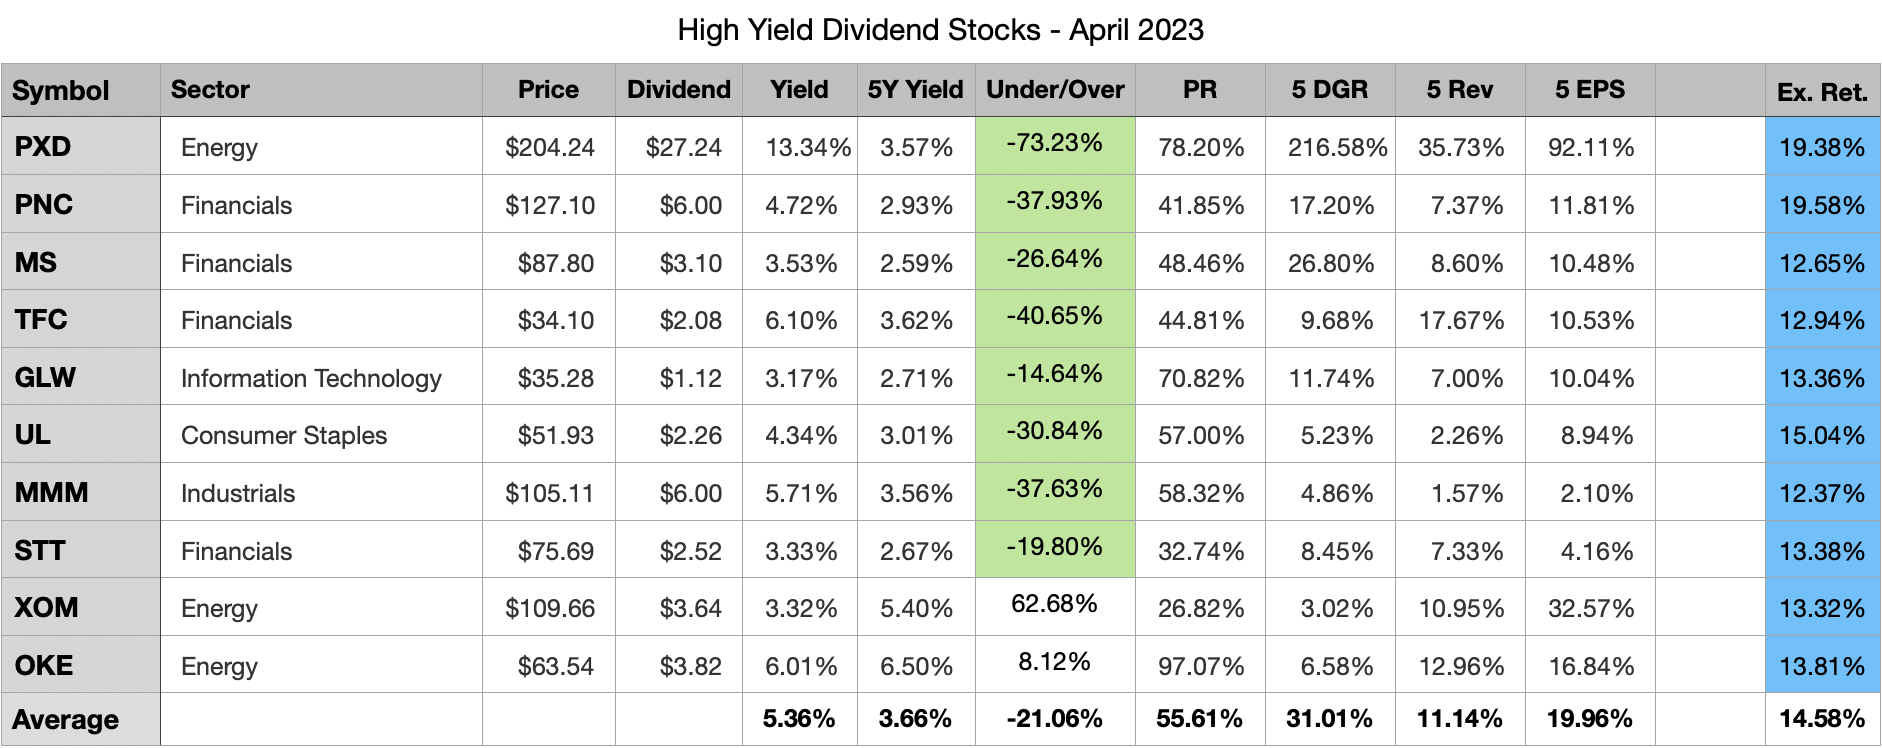 My Top 10 High Yield Dividend Stocks For April 2023 Best Stocks